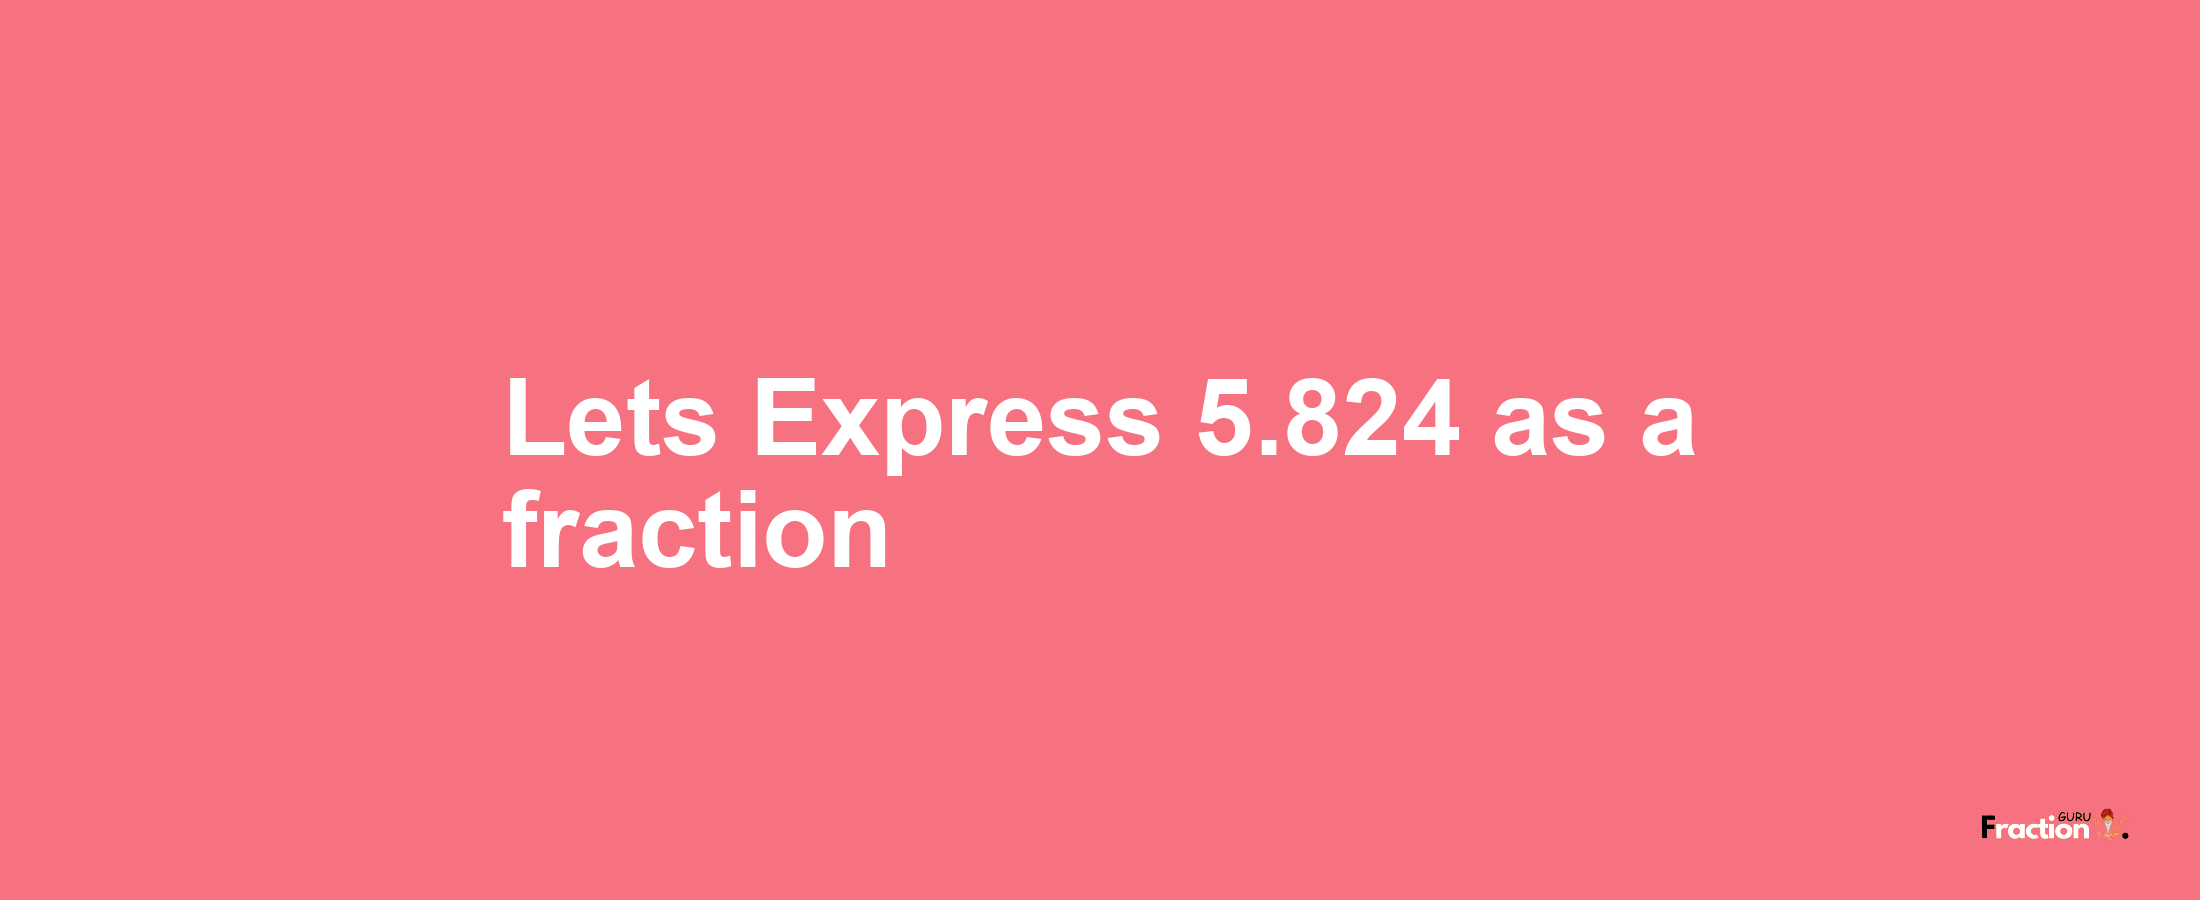 Lets Express 5.824 as afraction